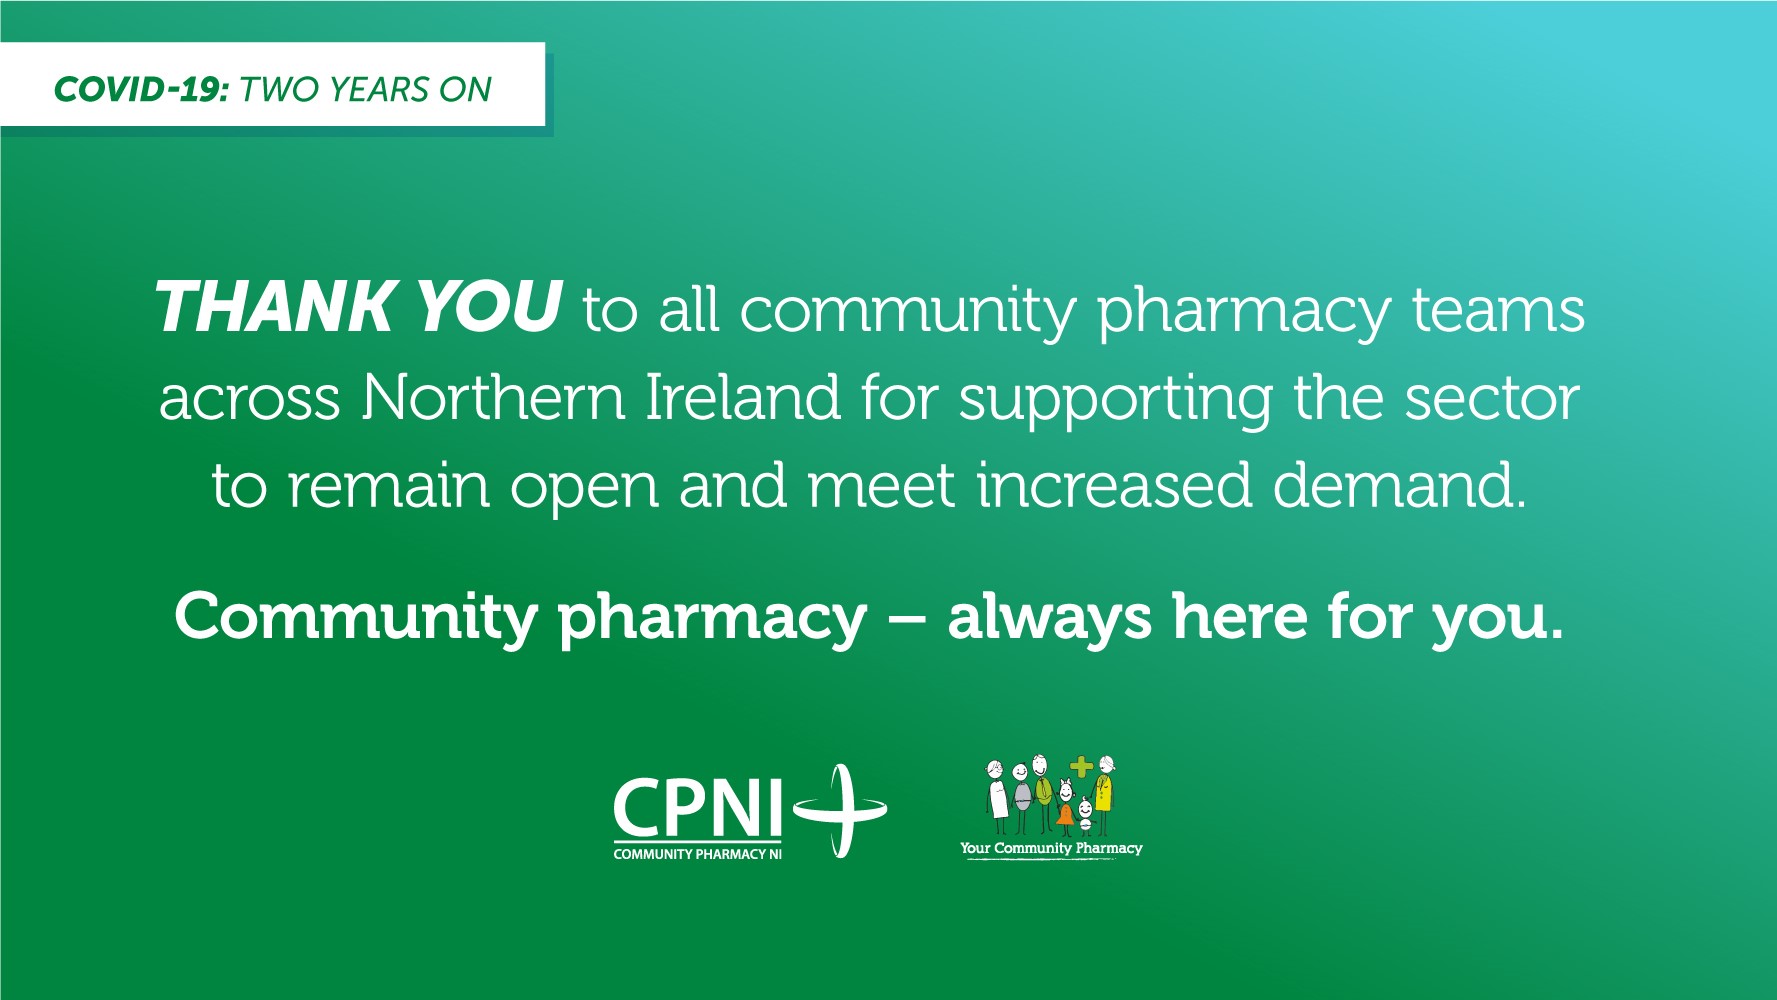 Community Pharmacy NI hails workforce as it marks two years since pandemic began